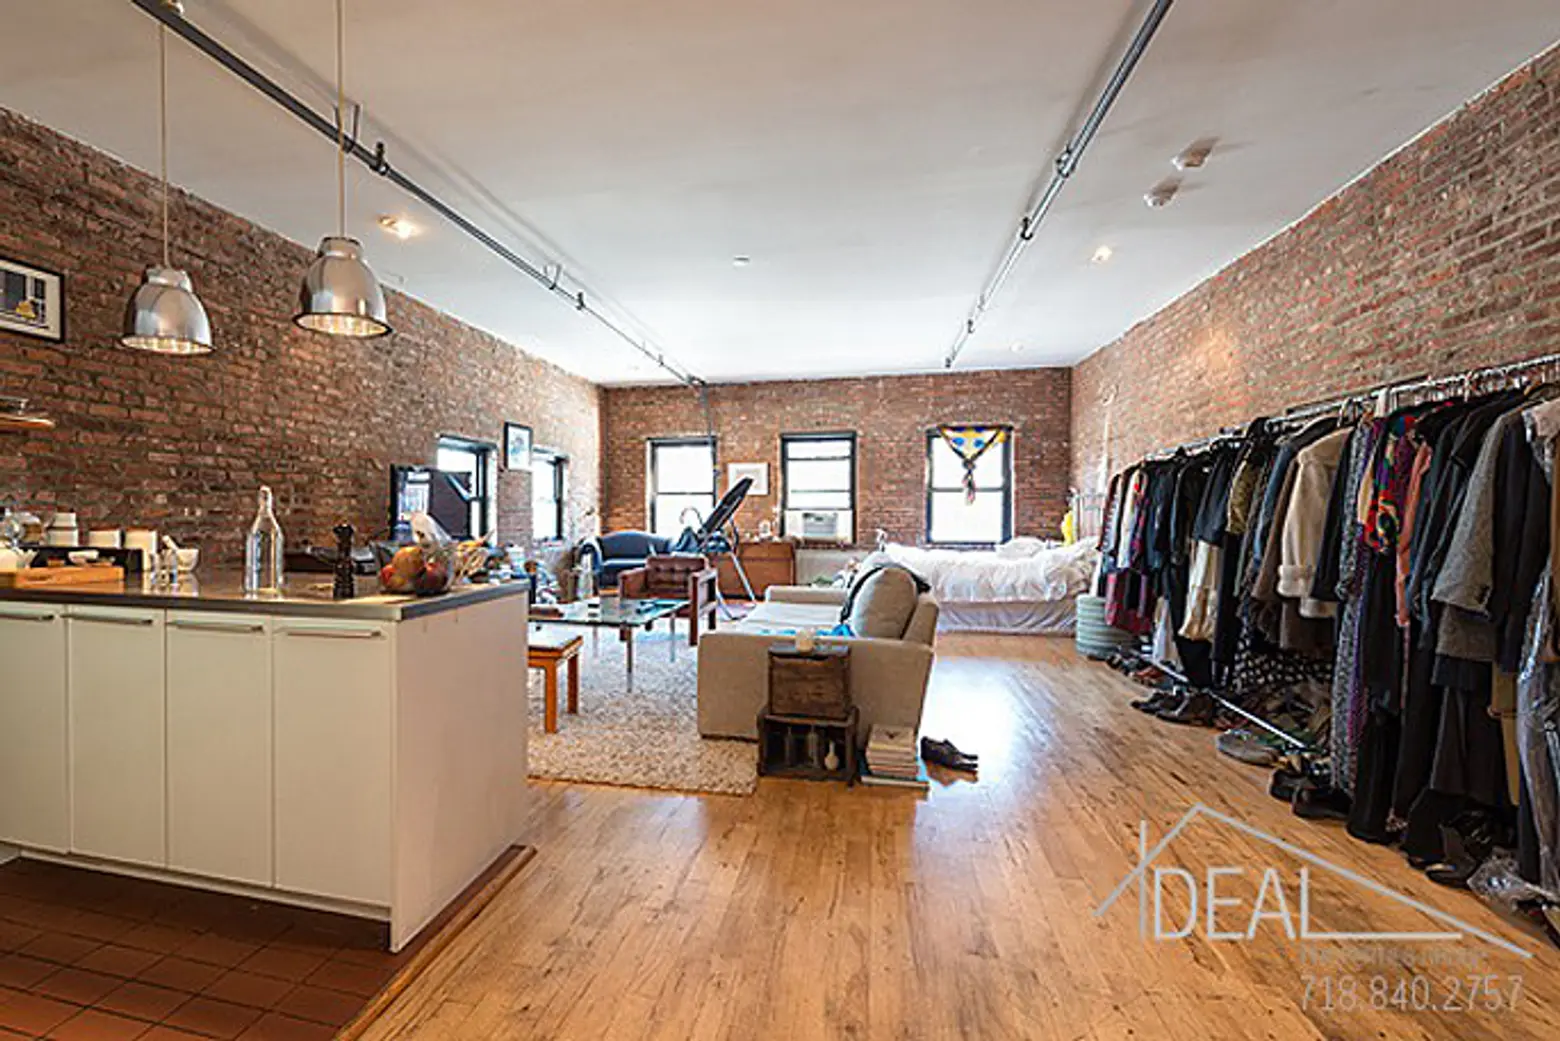 Hip Loft with High Ceilings and Exposed Brick Is Quintessentially Williamsburg